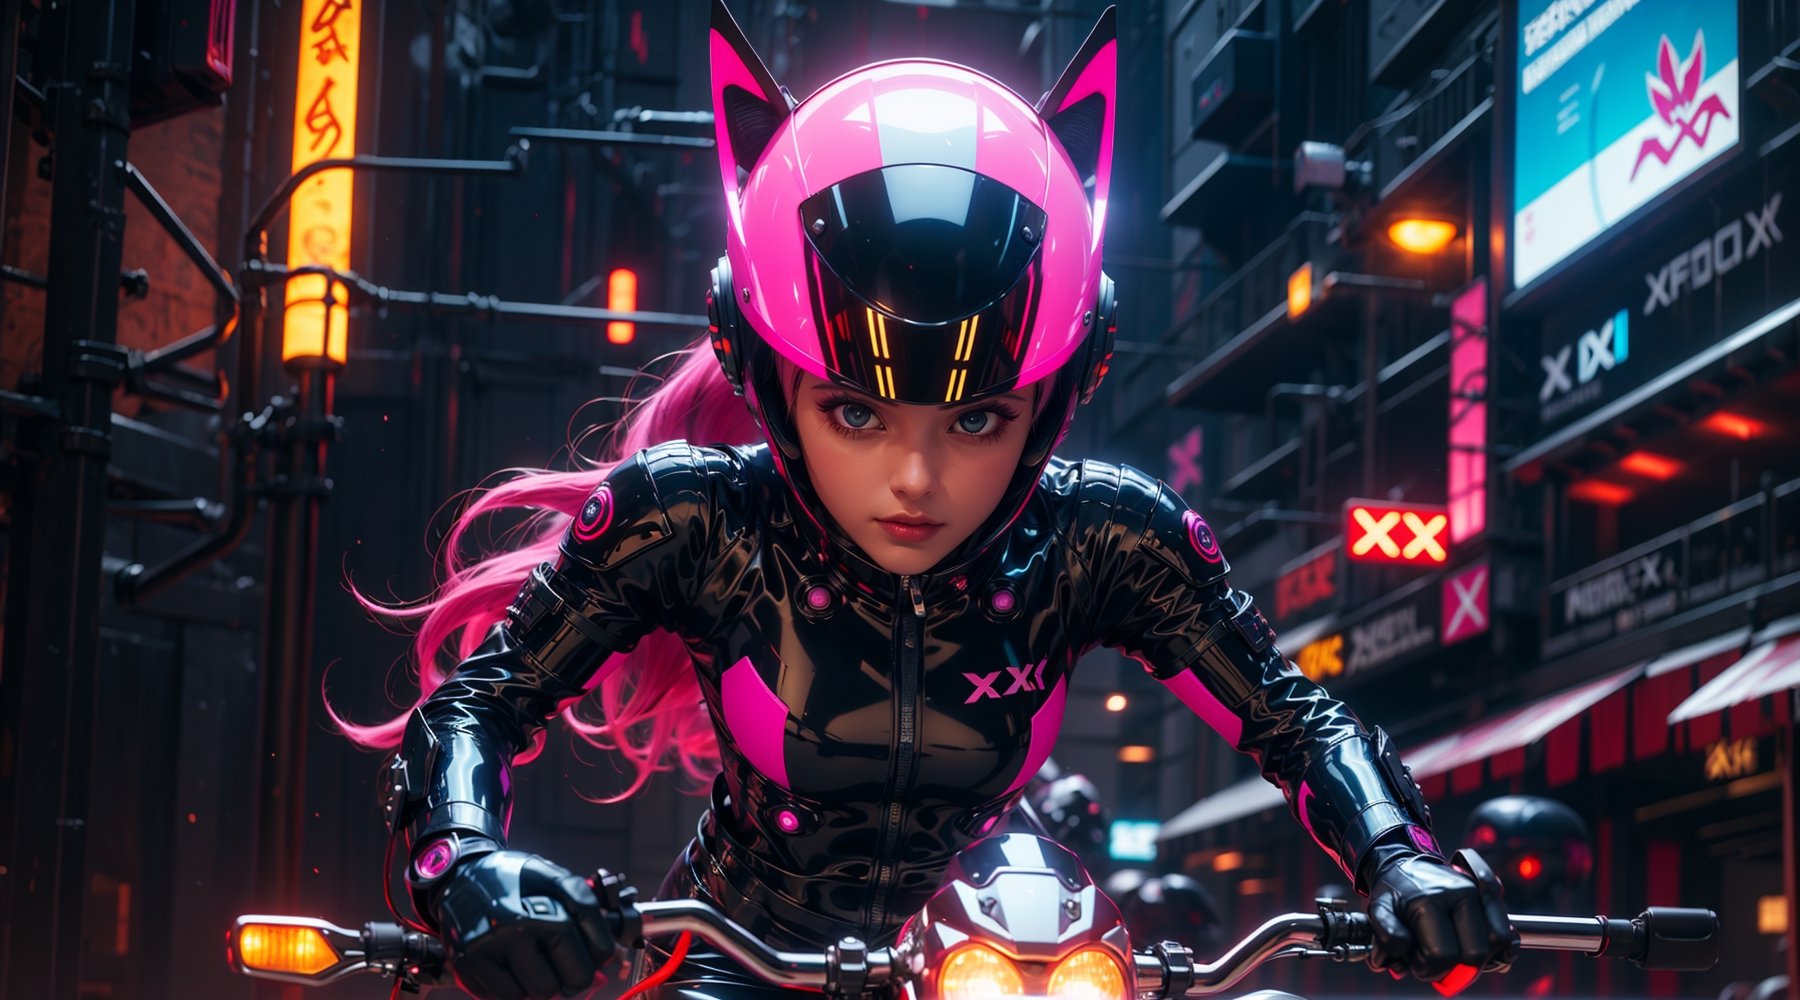 r1ge, Futuristic girl, female alien suit, motox fox helmet, detailed, ultra HD quality,  pink hair, hdr reflection, riding a handsome motorcycle, reflector light,  in the futuristic cyberpunk style,